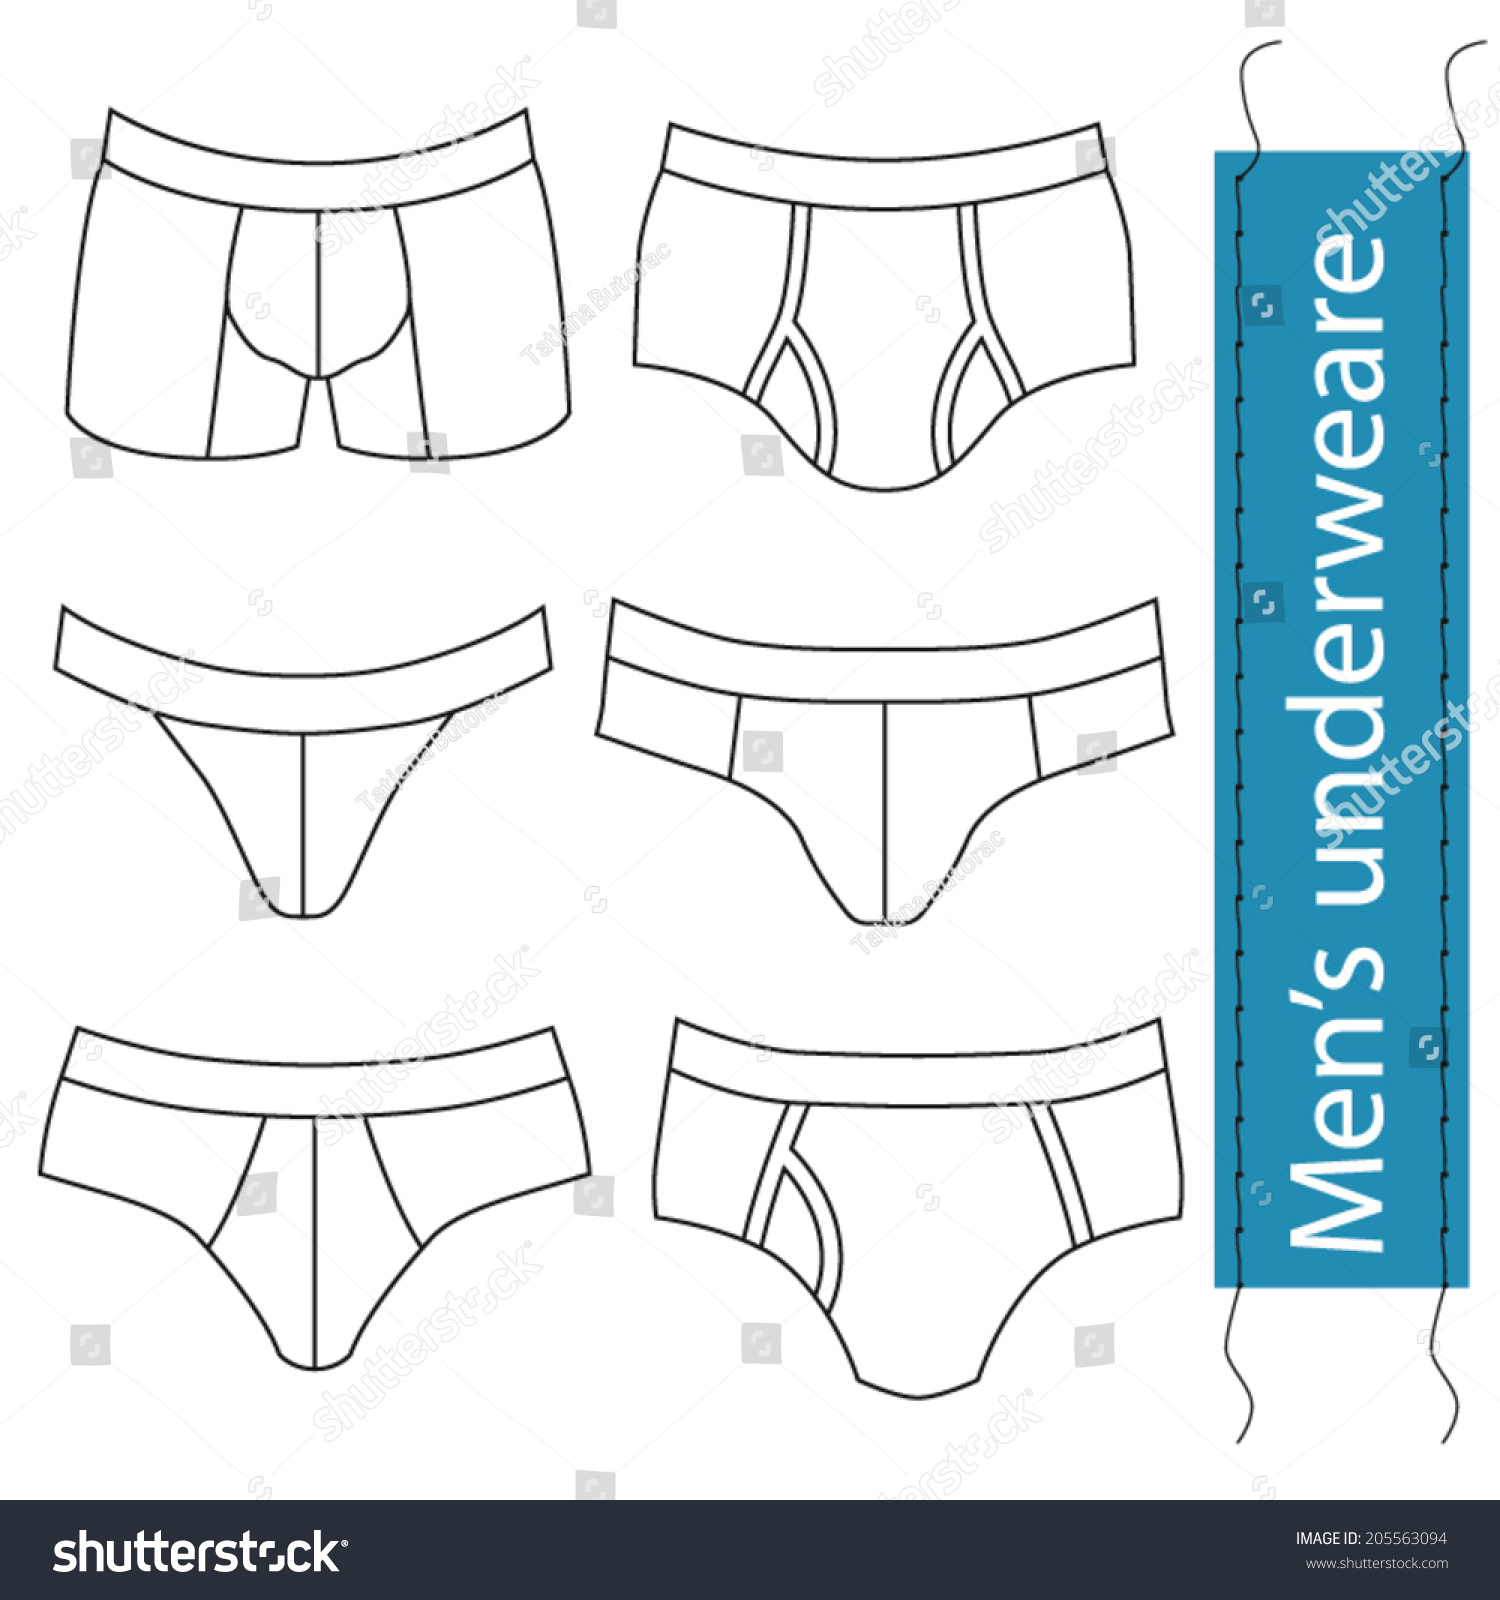 clipart pictures of underwear - photo #48